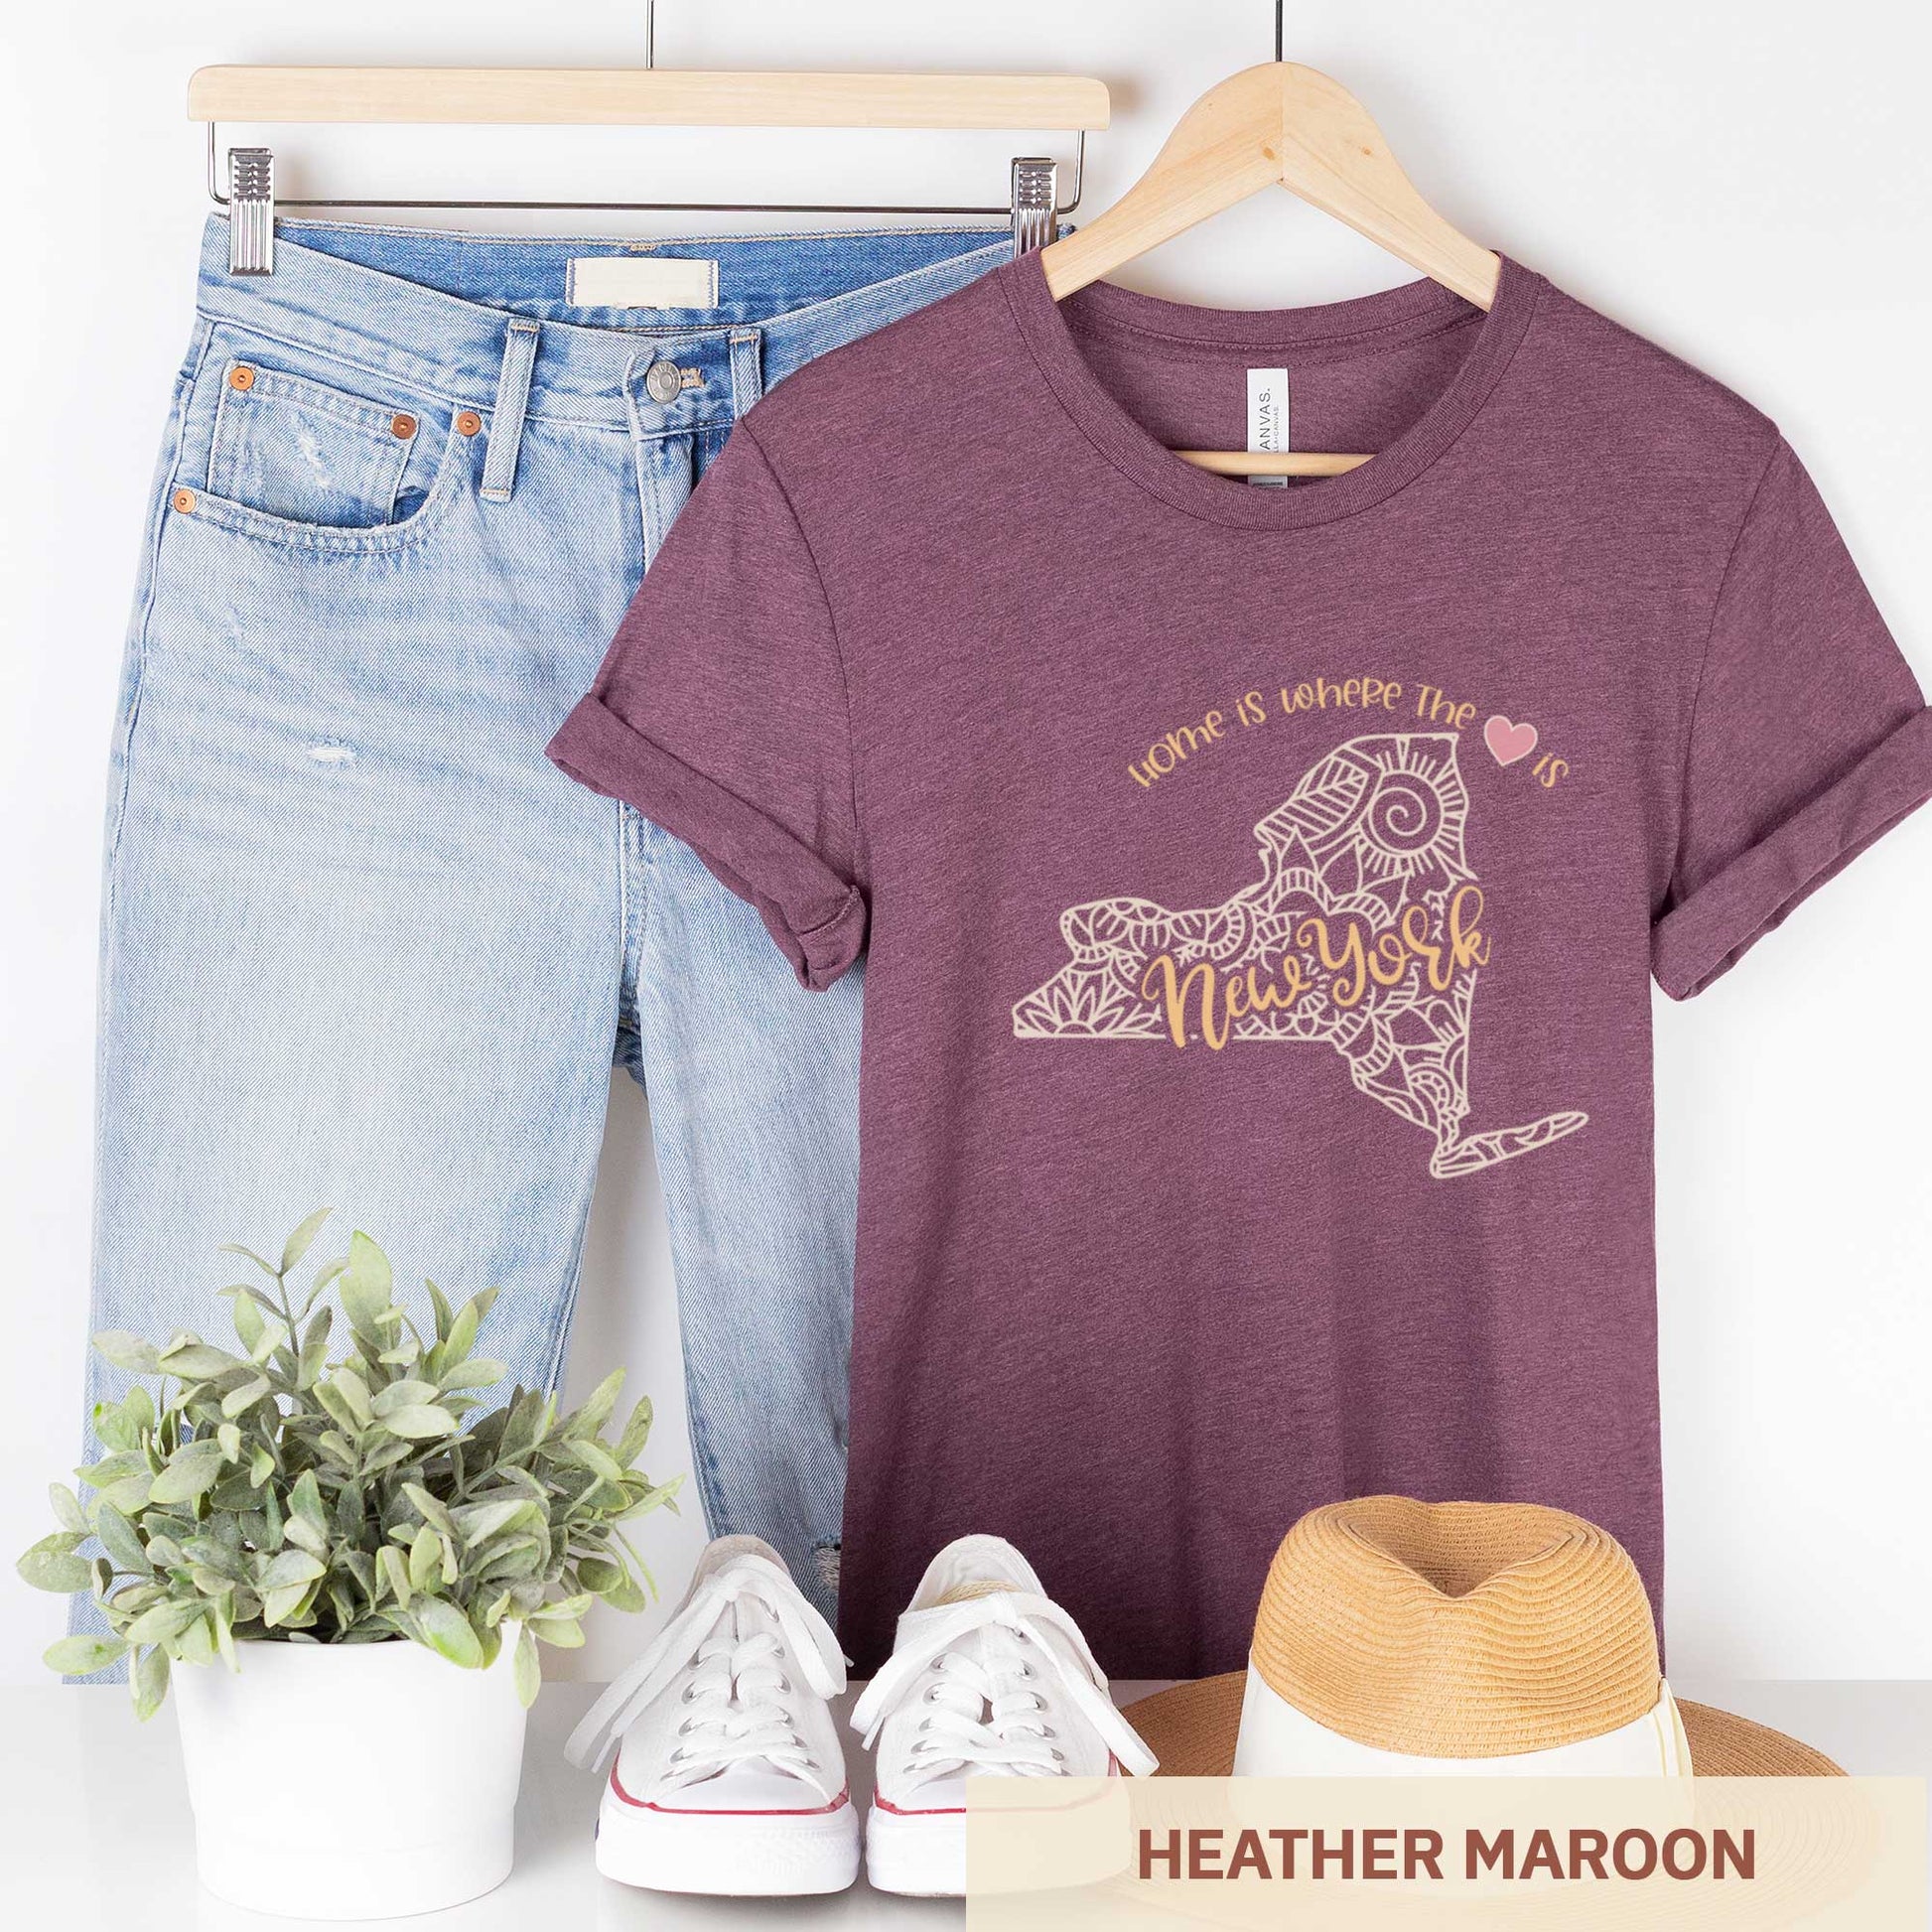 A hanging heather maroon Bella Canvas t-shirt featuring a mandala in the shape of New York with the words home is where the heart is.